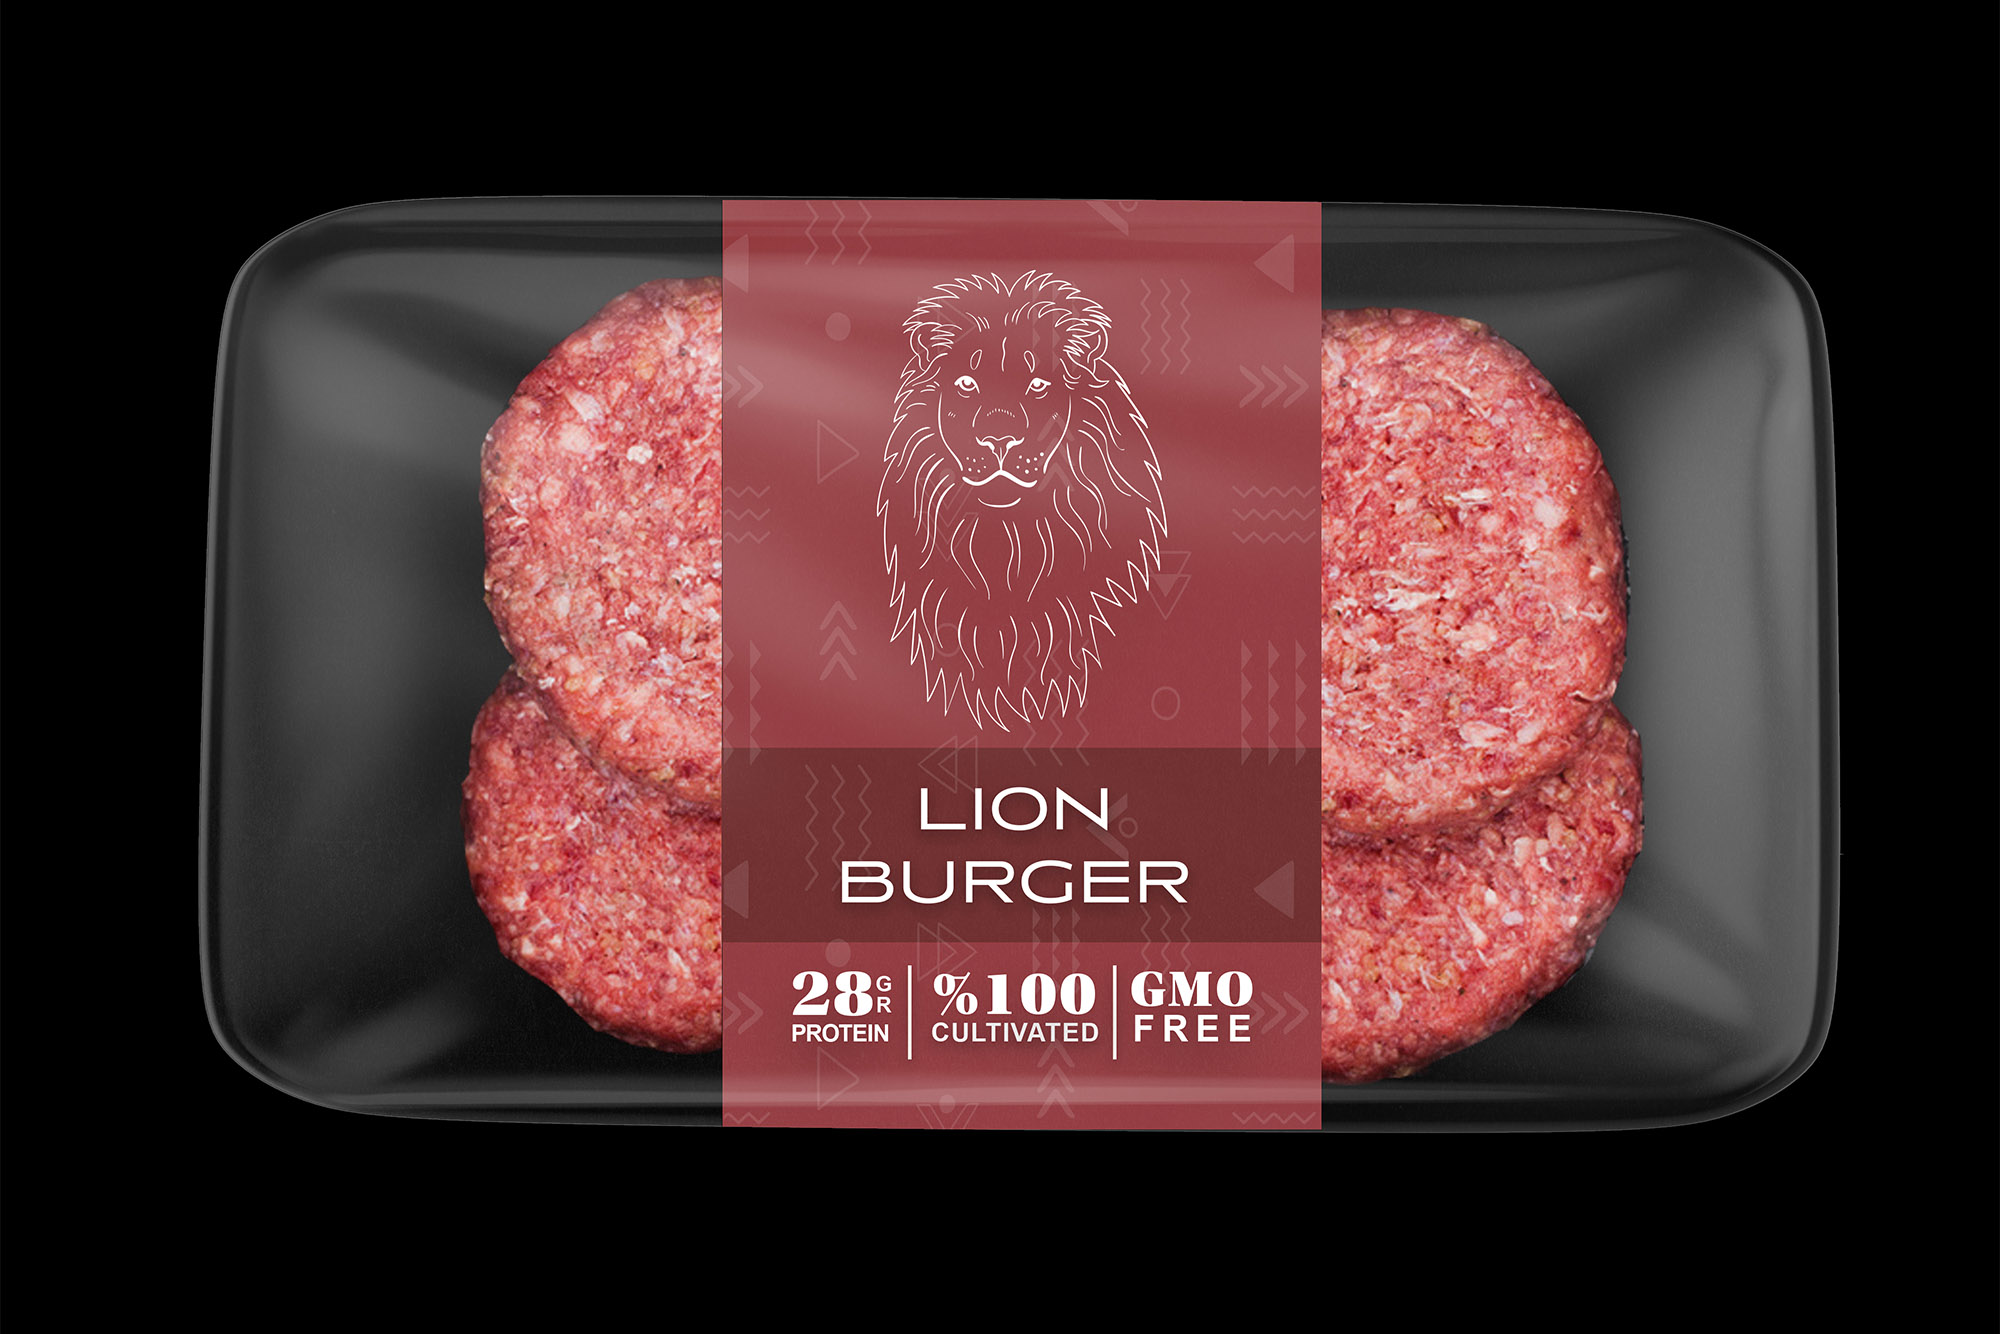 Lion steak, anyone? Get ready for lab-grown wild animal meat | Digital  Trends